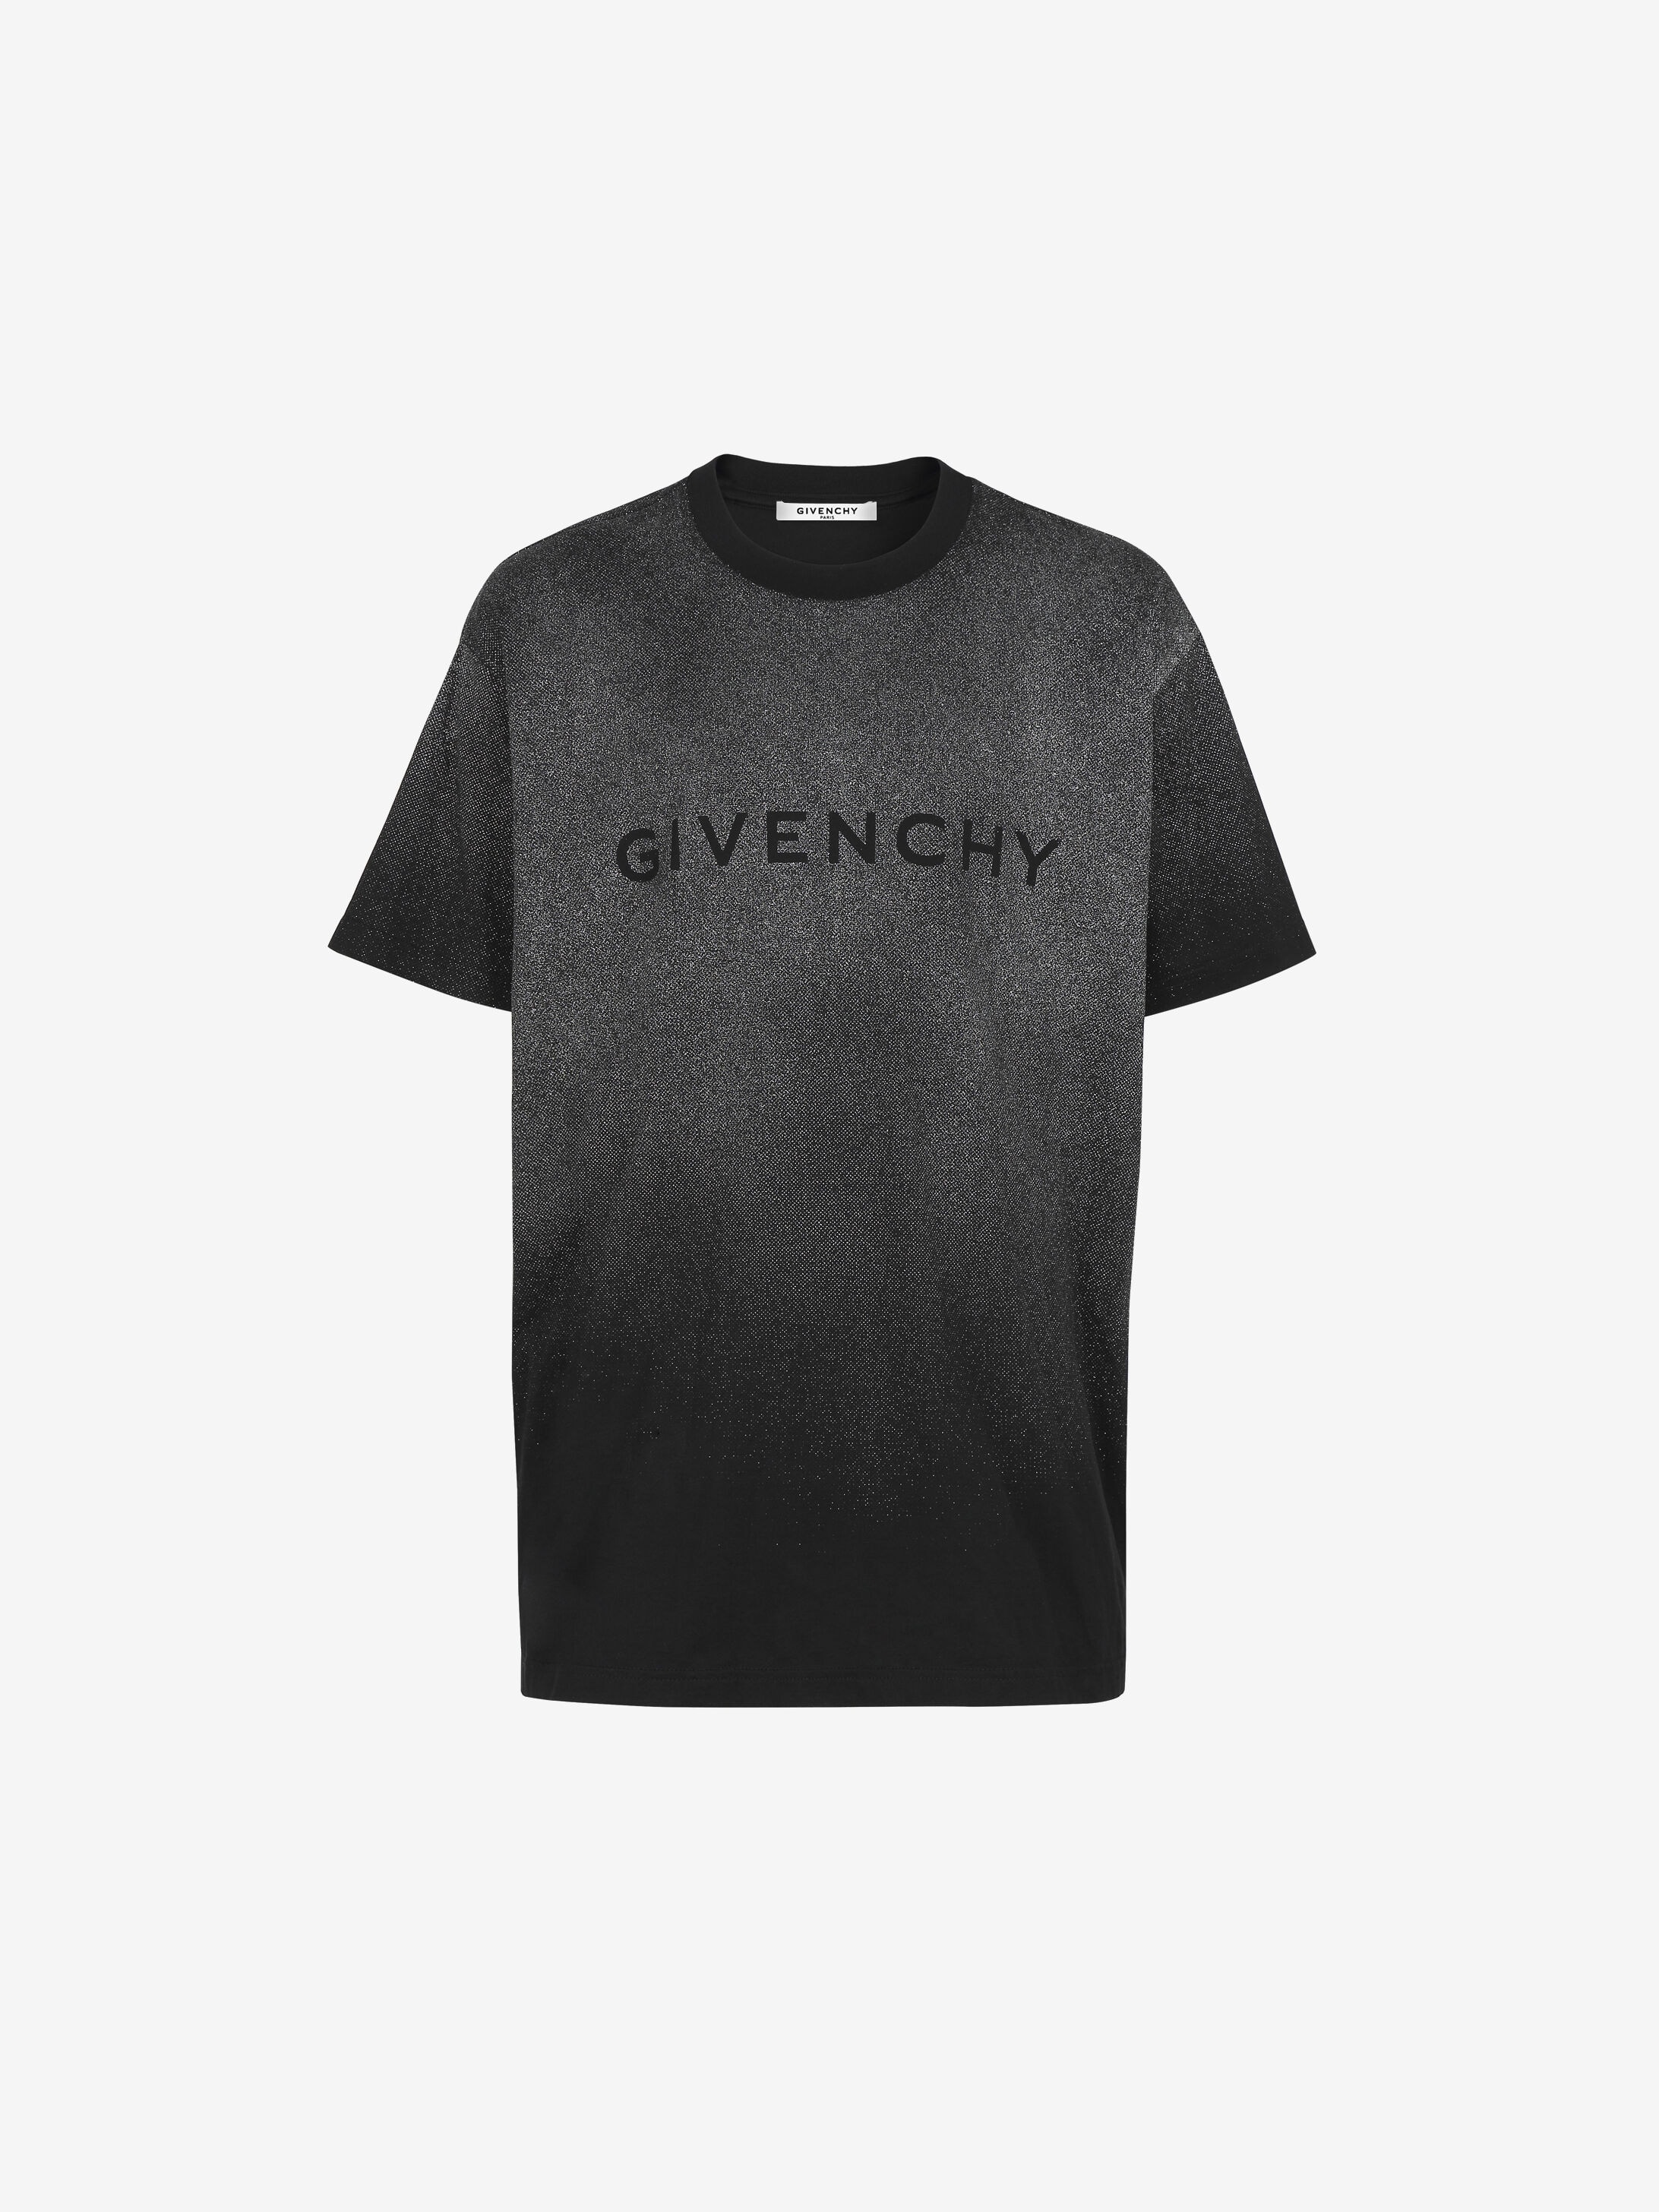 Givenchy Men S Size Chart